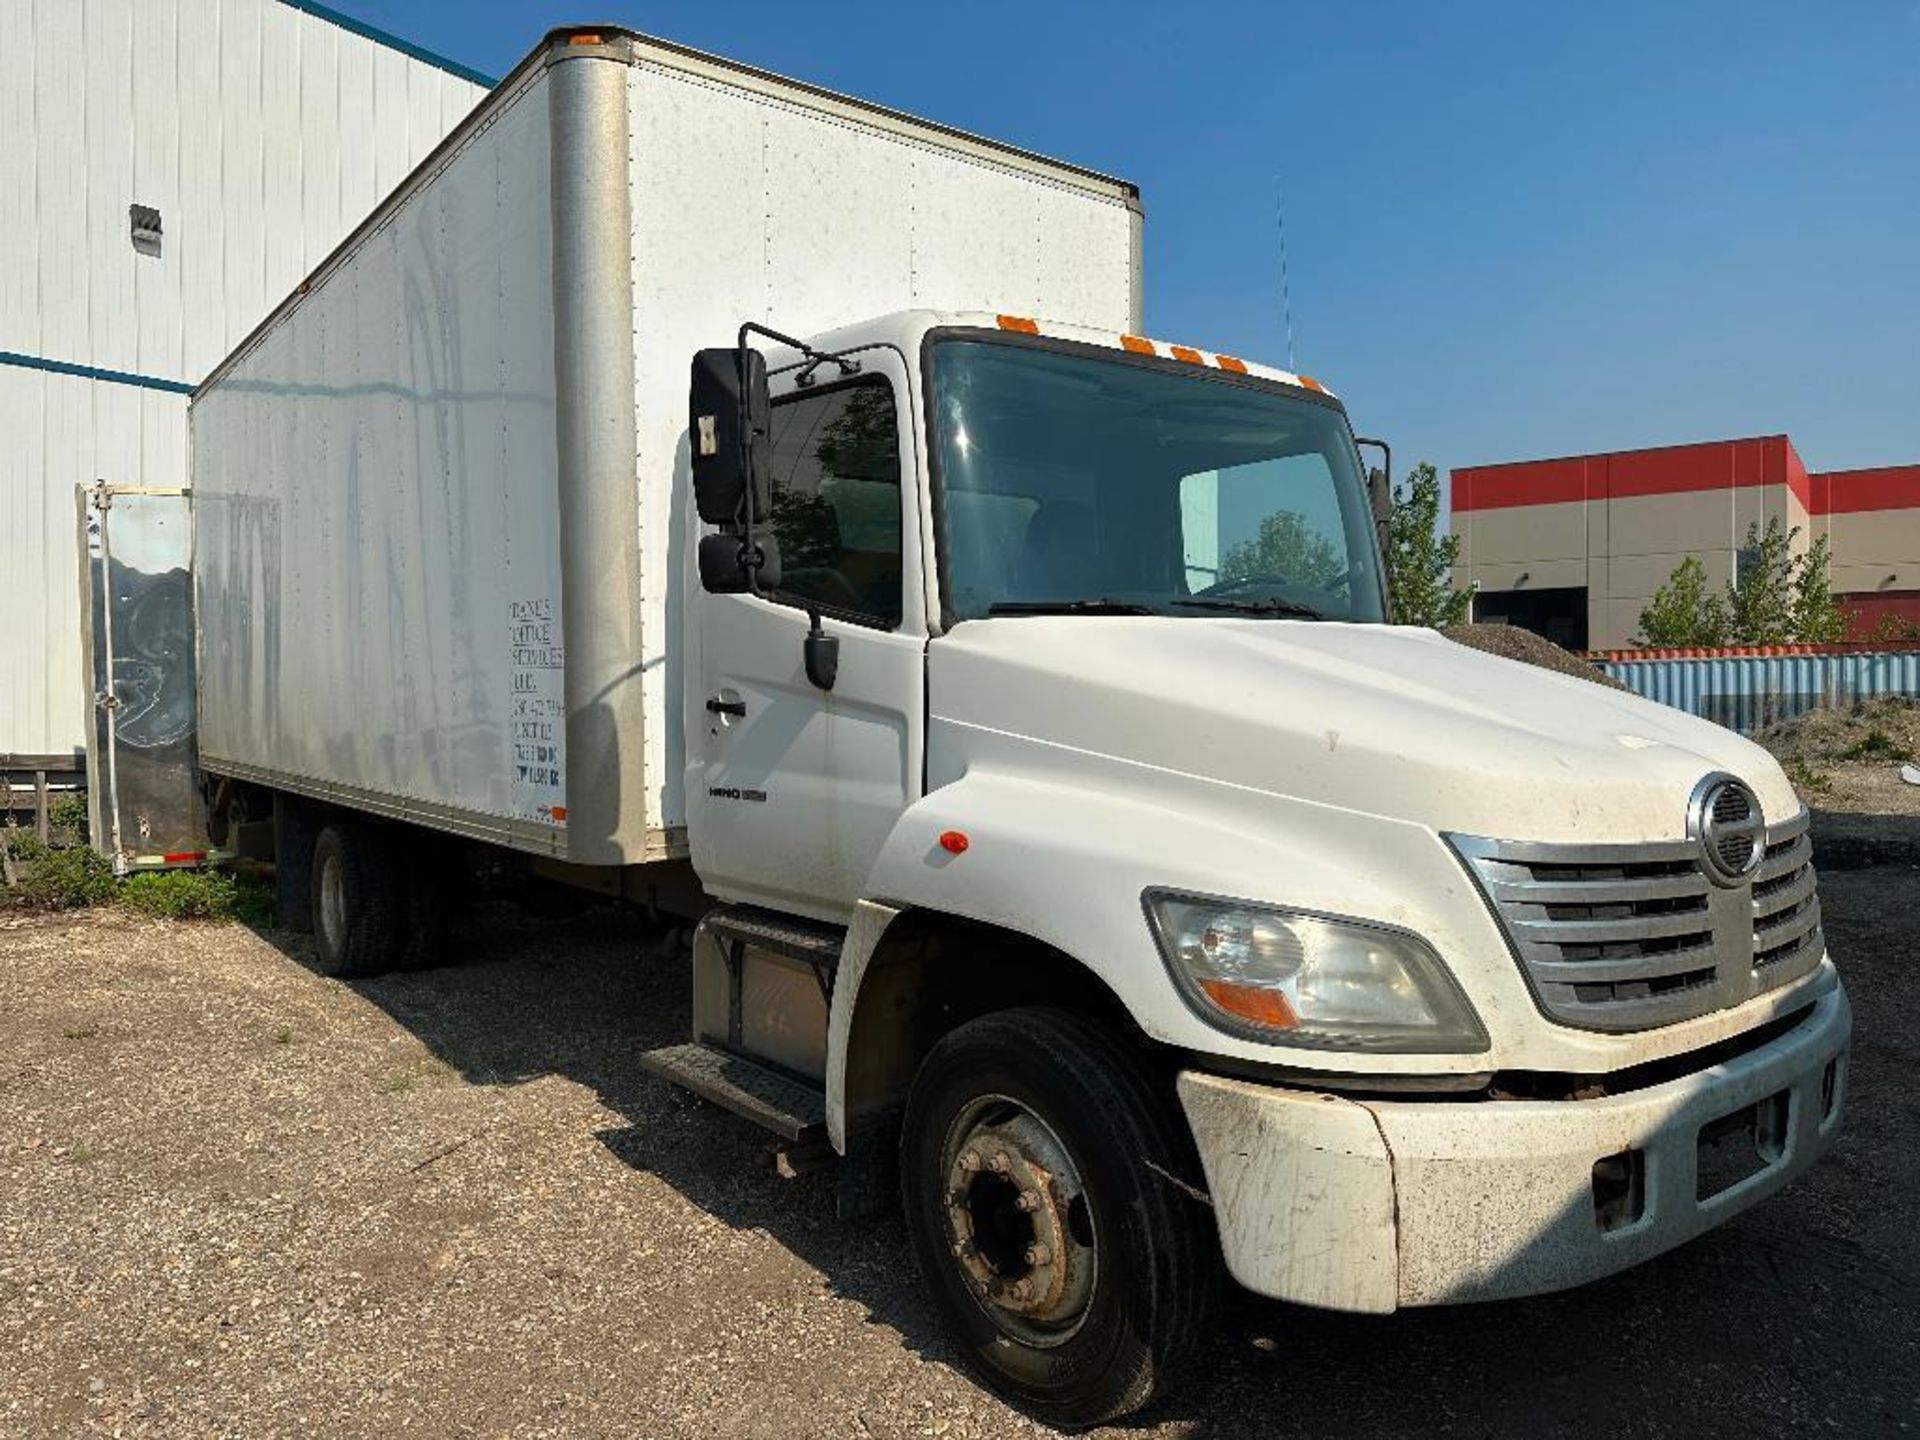 2007 Hino 258 S/A Cube Van, 22’ Box, 219,480km Showing, VIN#: 2AYND8JP573S10609 - Image 2 of 13